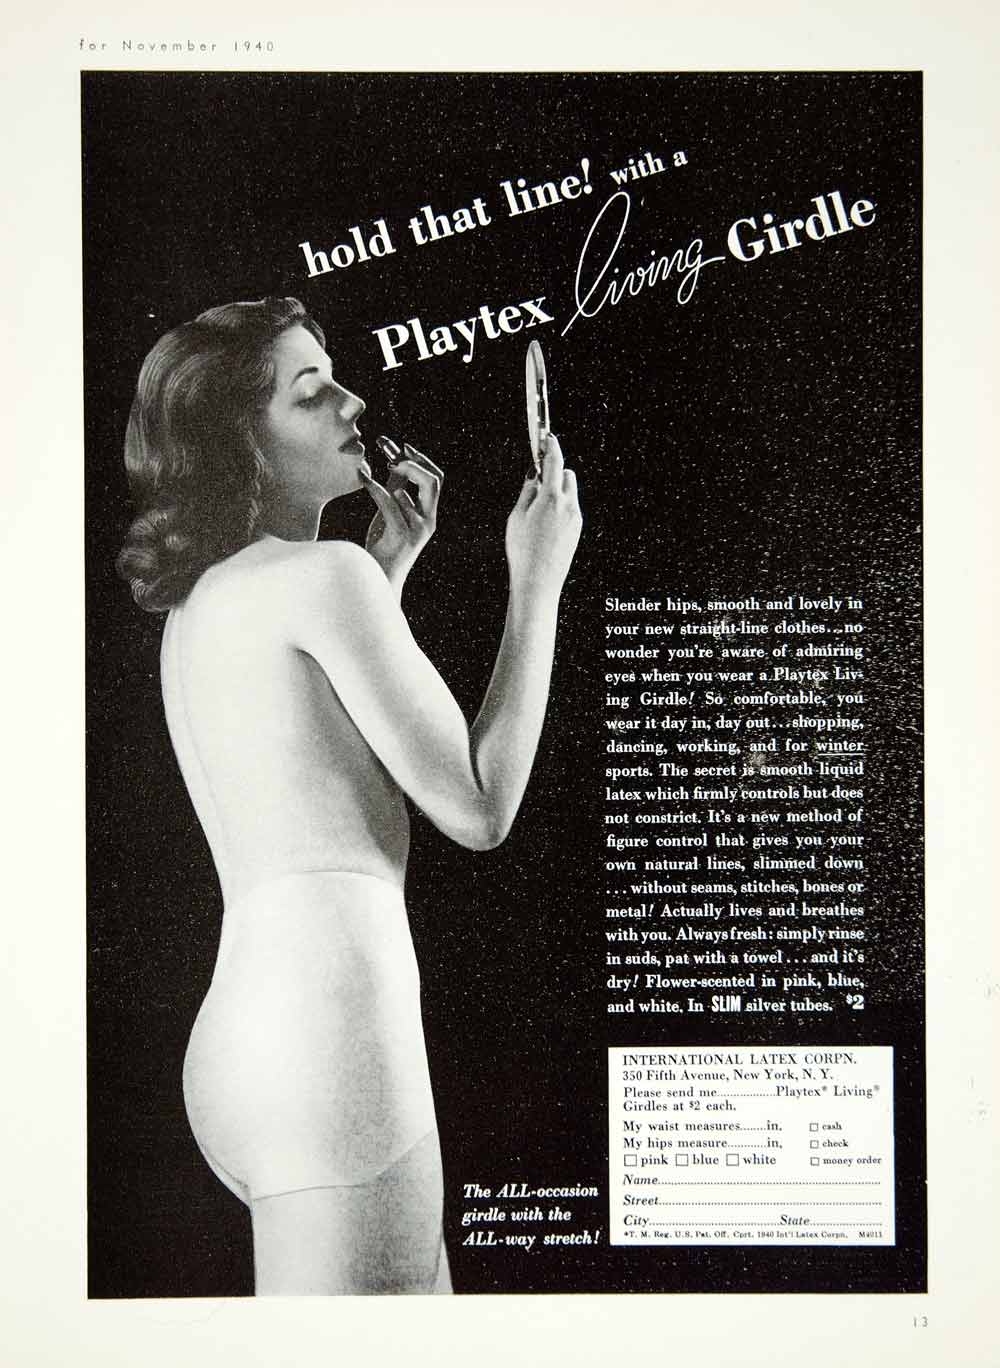 A New Comfort in Girdle Fashion! Perfolastic Rubber Girdle ad 1925